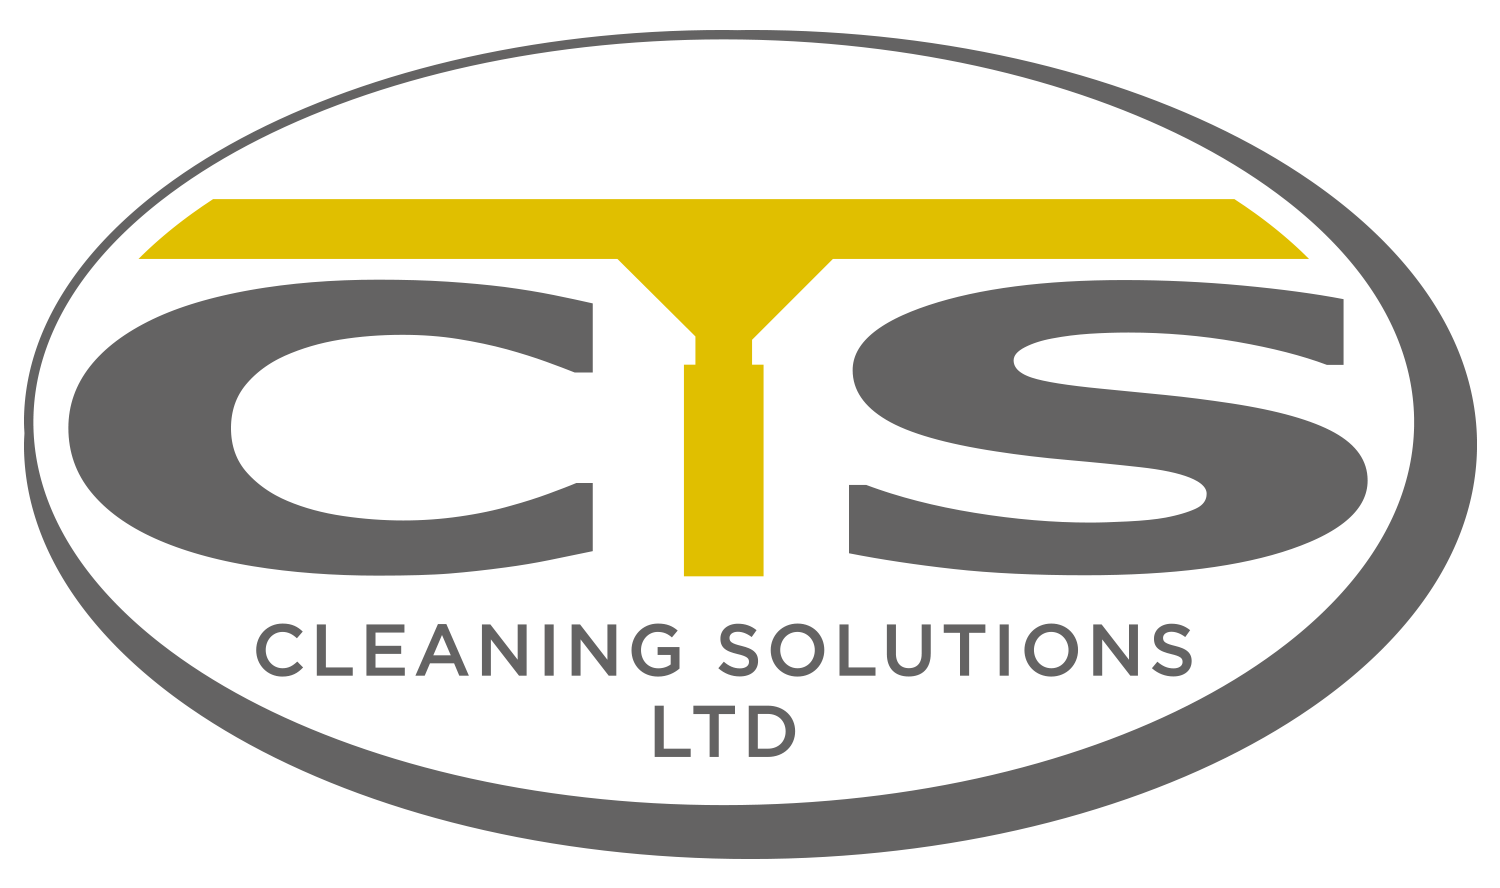 CTS Cleaning Solutions Ltd